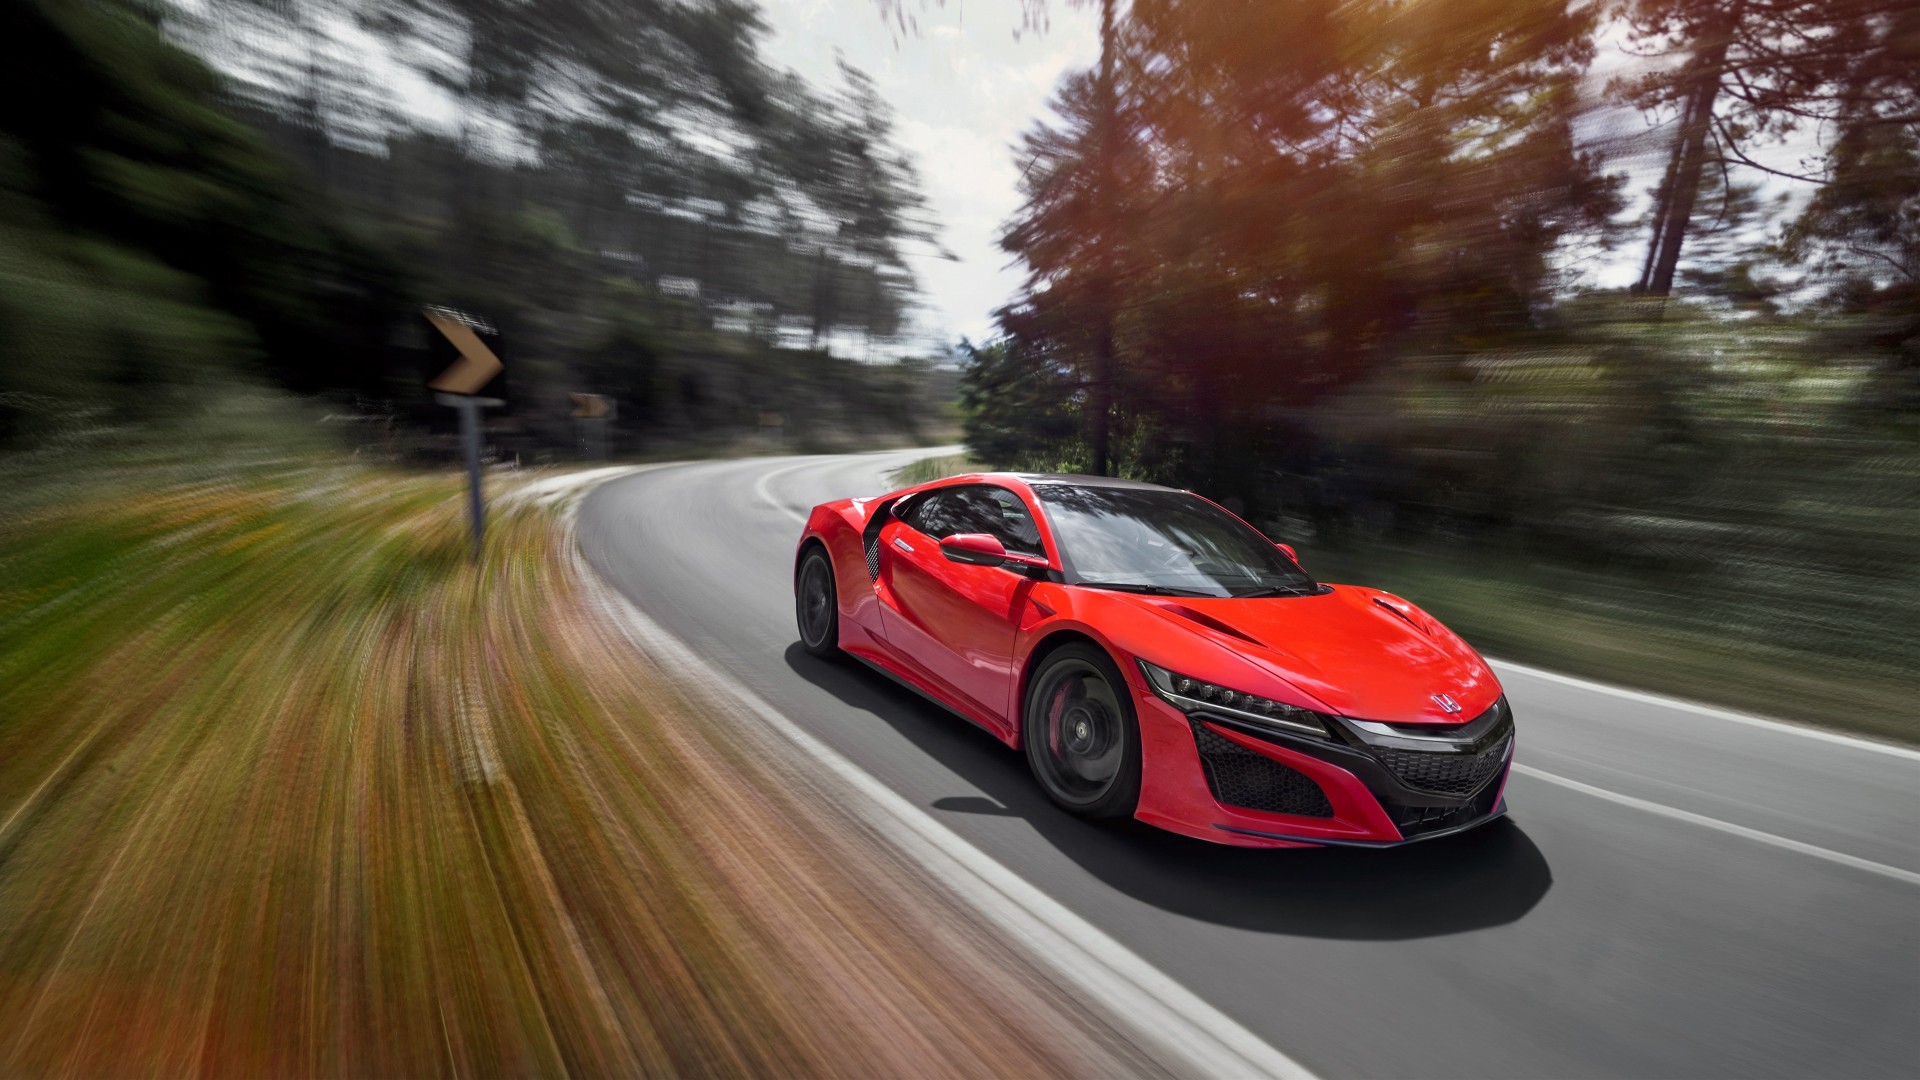 Your budget could be spent. 2017 Honda NSX Wallpaper | HD Car Wallpapers | ID #6783